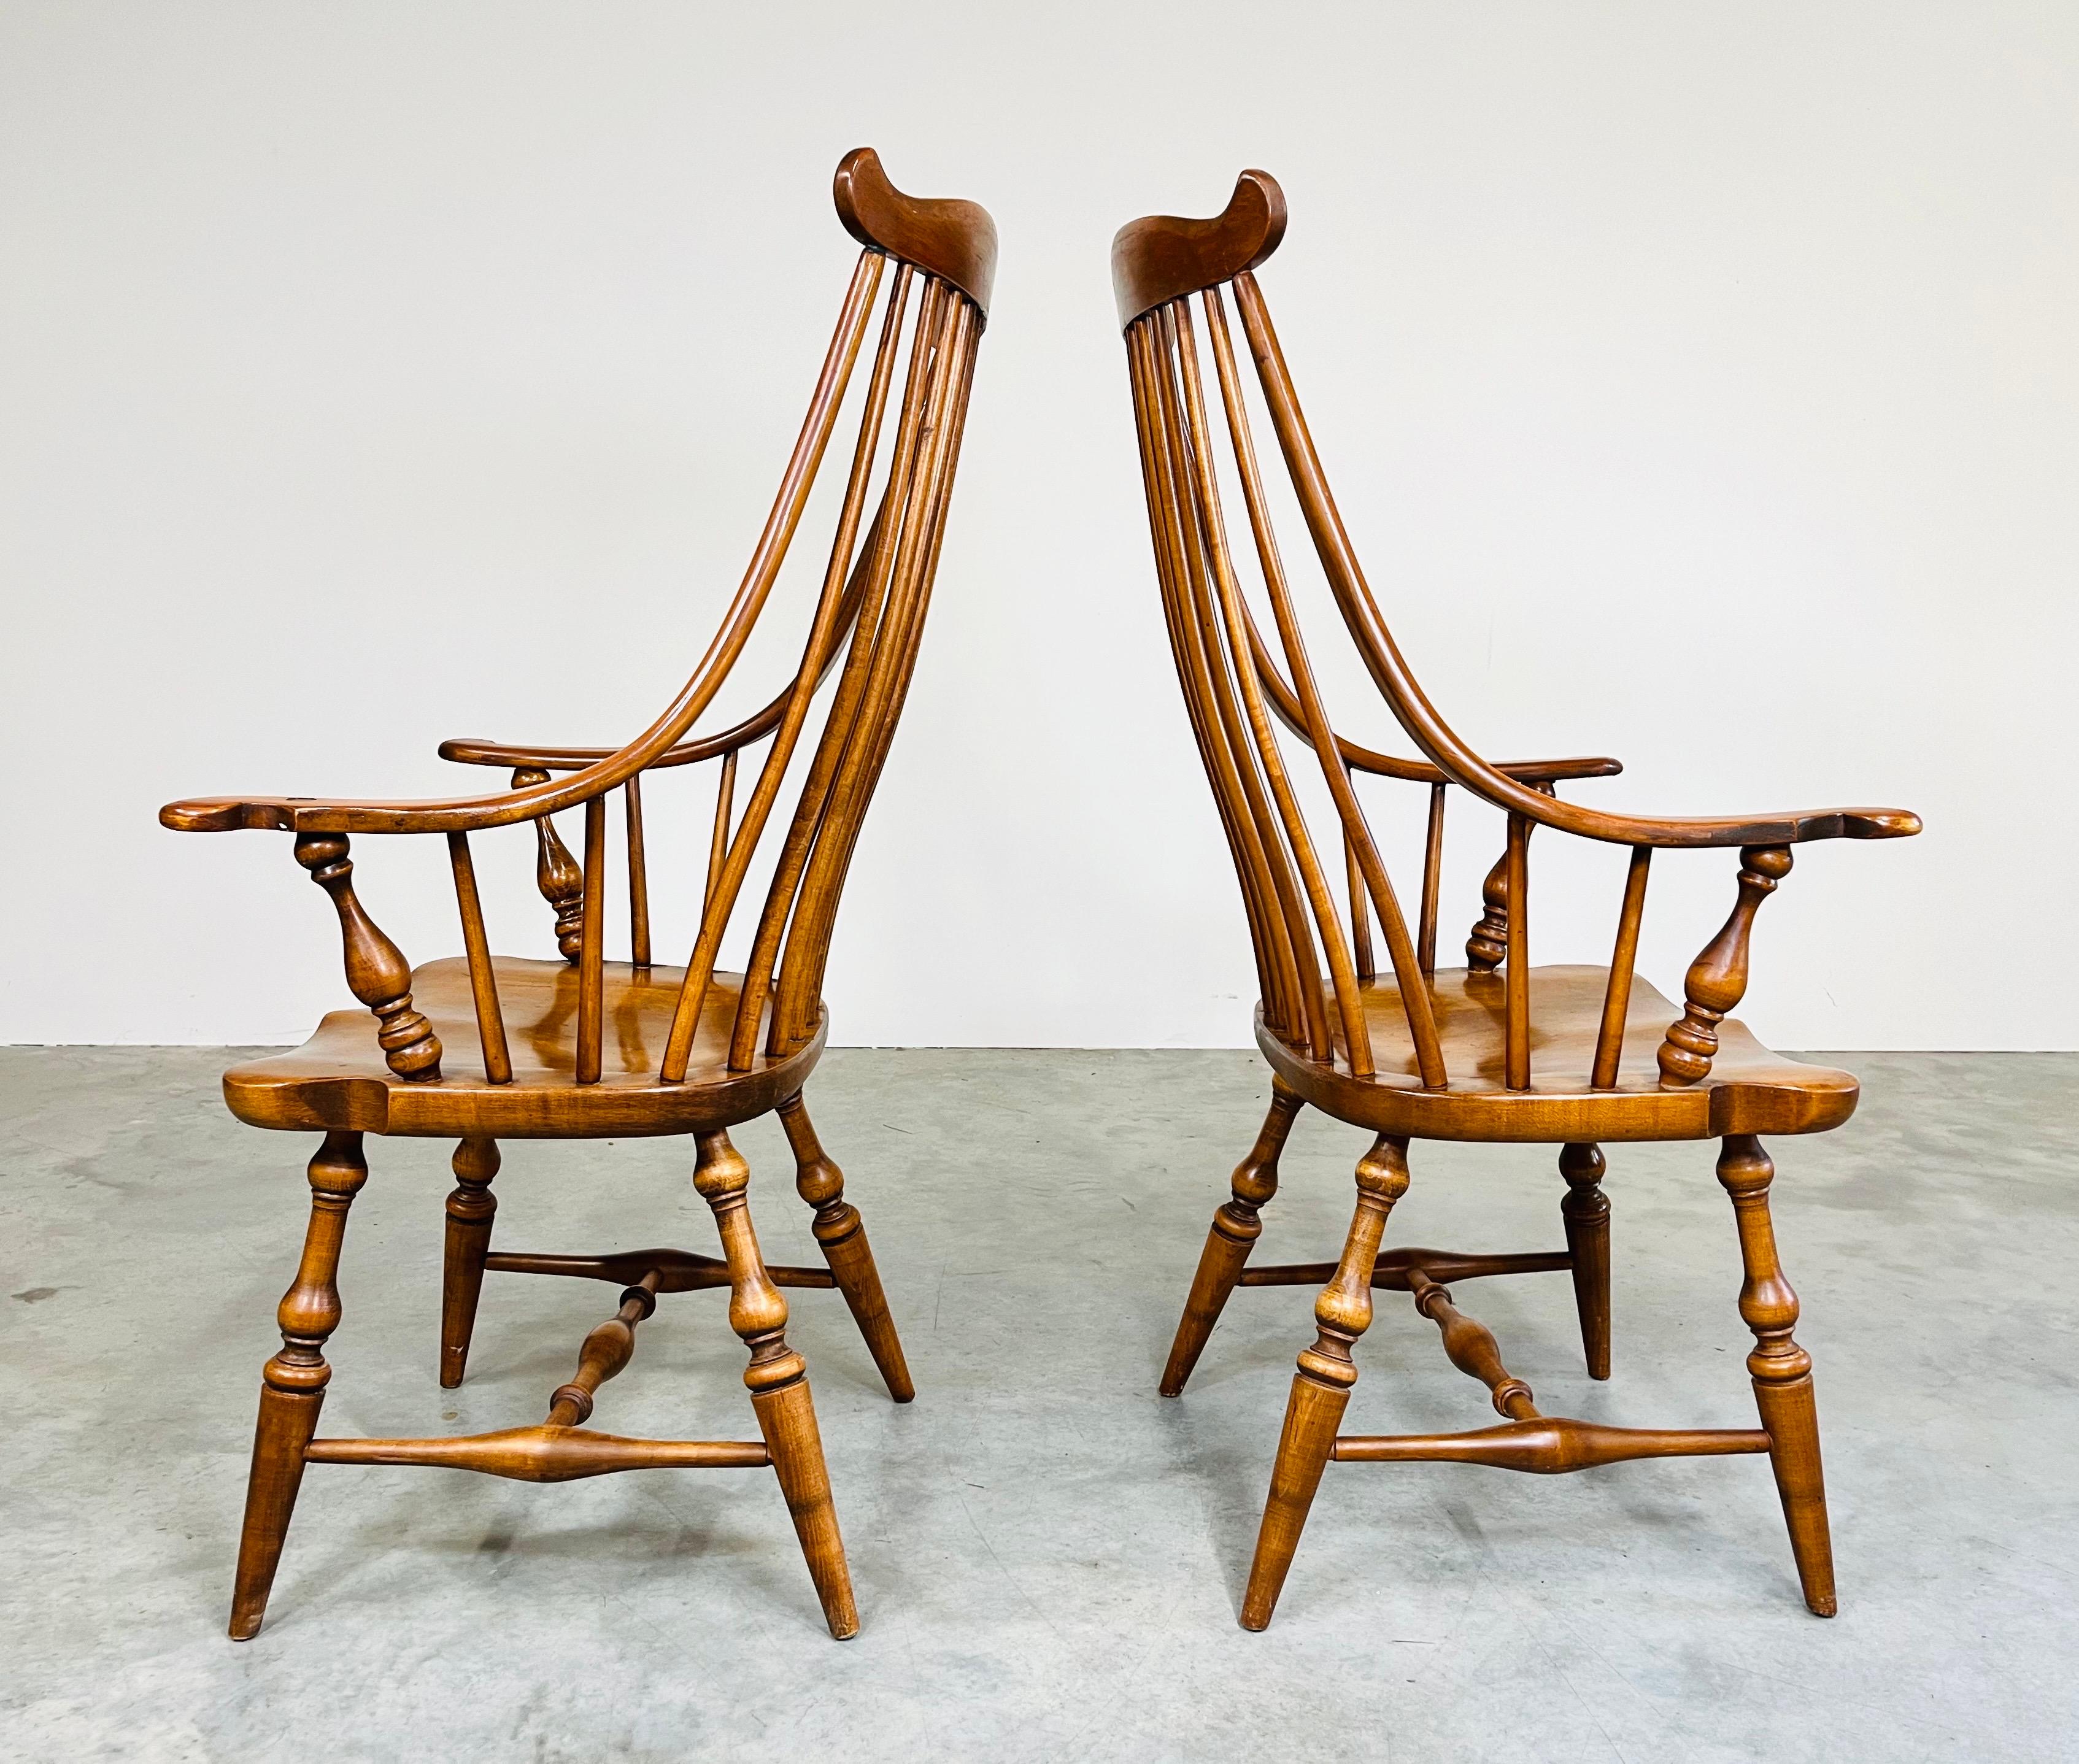 Carved Spindle Fan-Back Windsor Chairs By Heywood Wakefield 